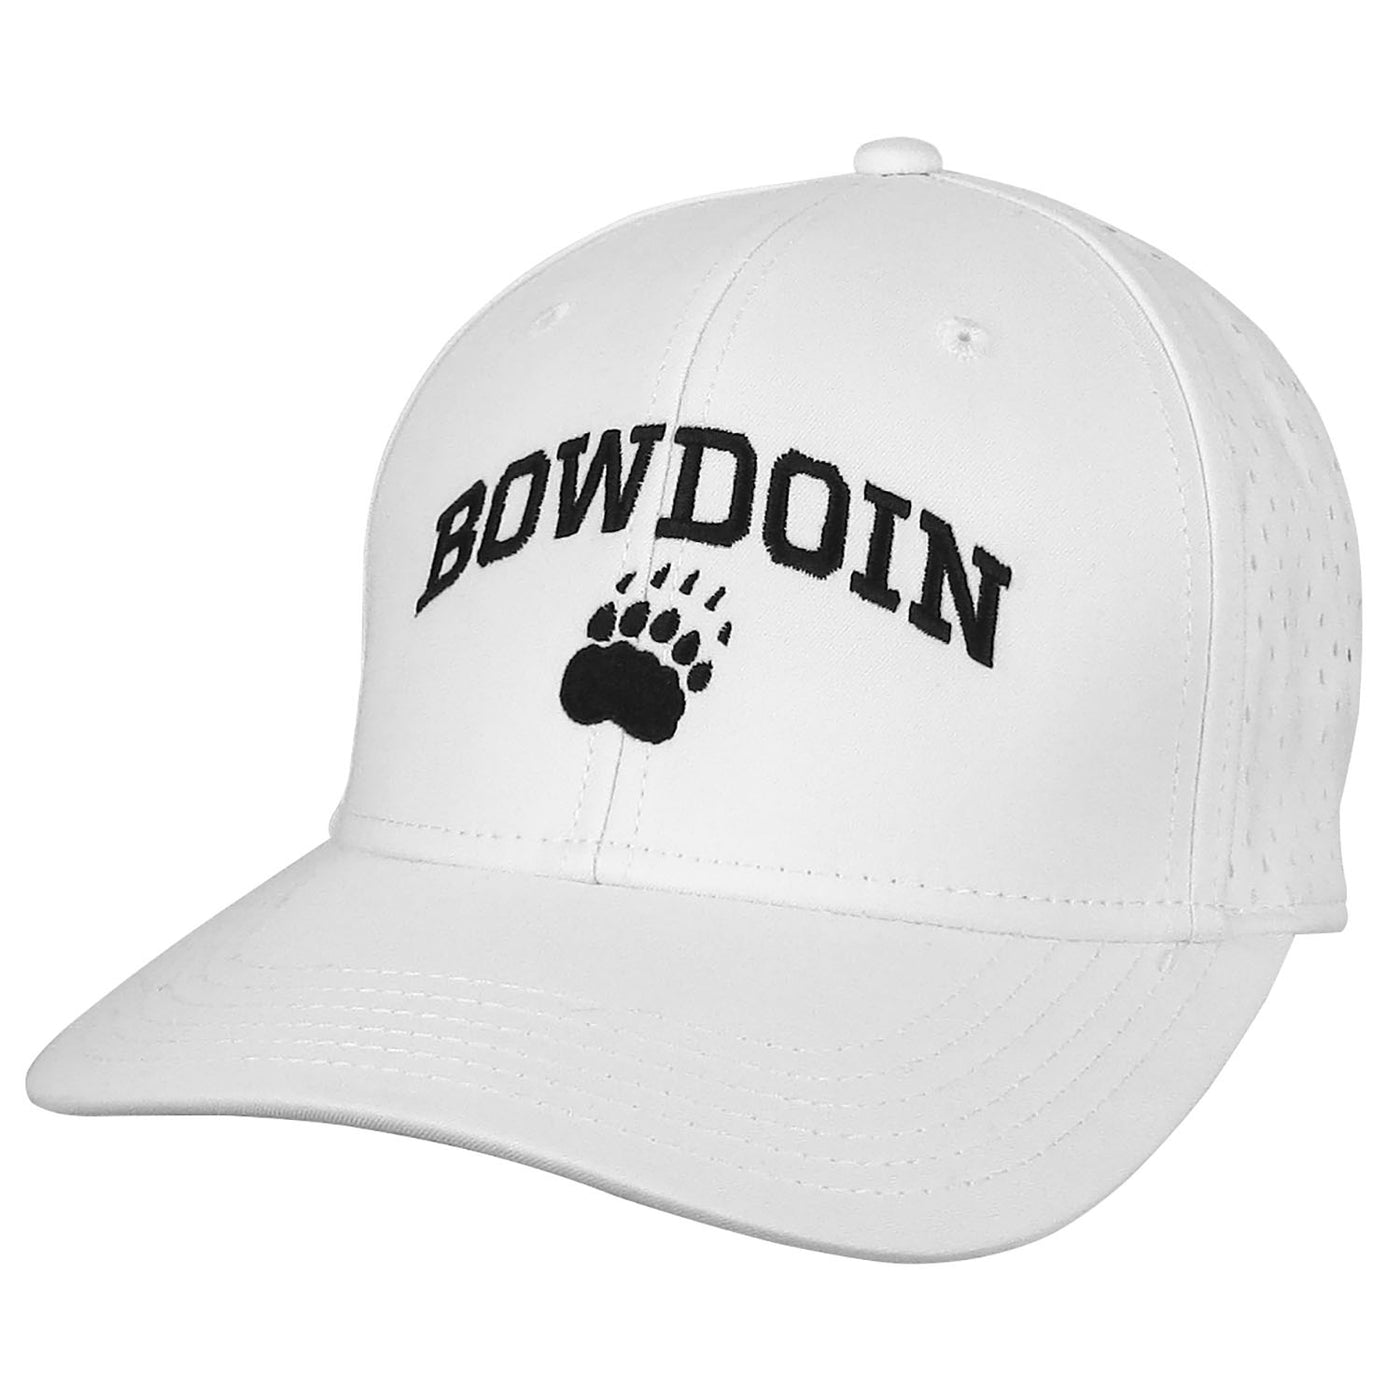 – The Hat with Mid-Pro and Legacy from Paw Bowdoin Bowdoin Reclaim Store